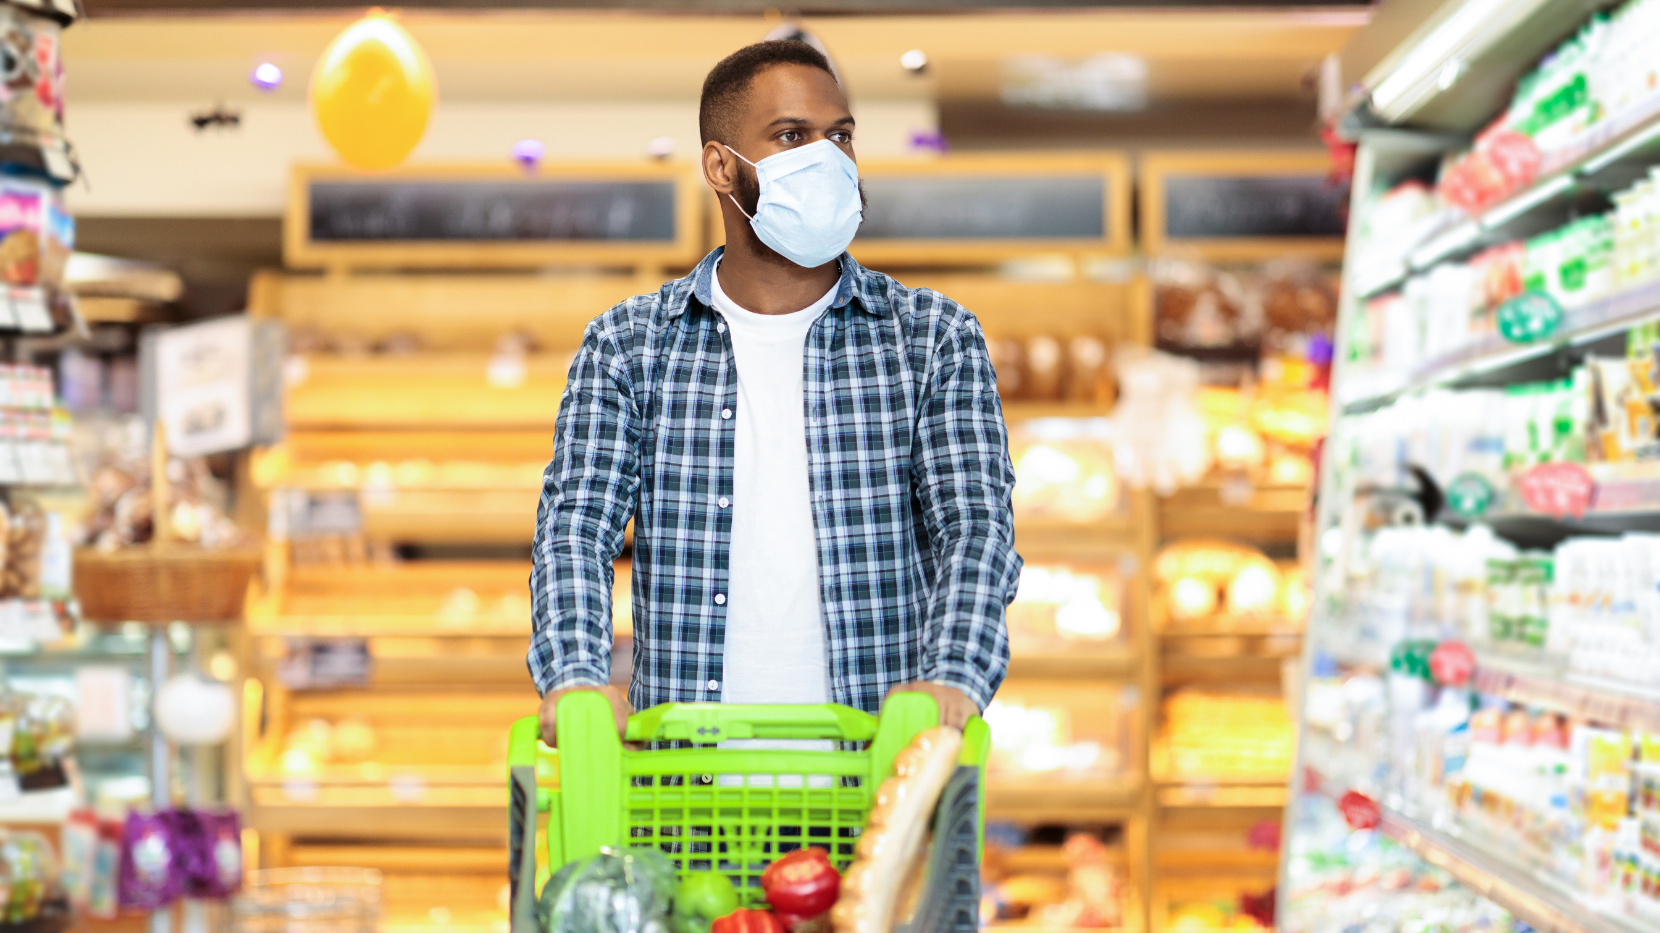 A Man Wearing a Mask While in a Grocery Store